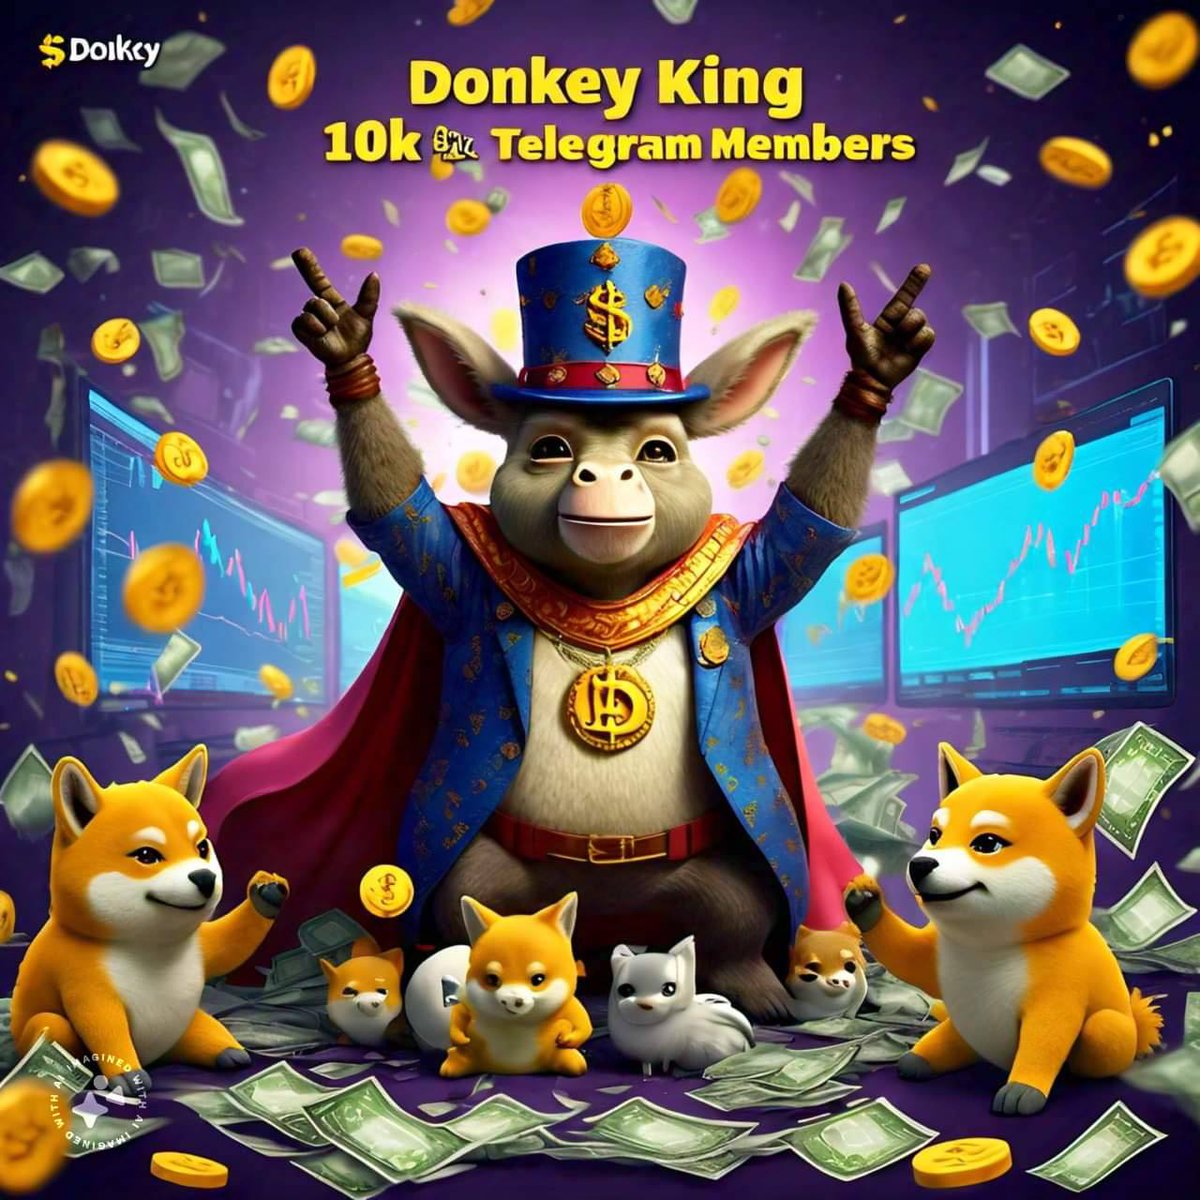 Donkey King $DOKY: Where silliness meets crypto innovation! 🌟 Join the #DokyKingArmy and experience the joy of being part of a vibrant meme coin community. #NoPresale #CoinMarketCap #CEX